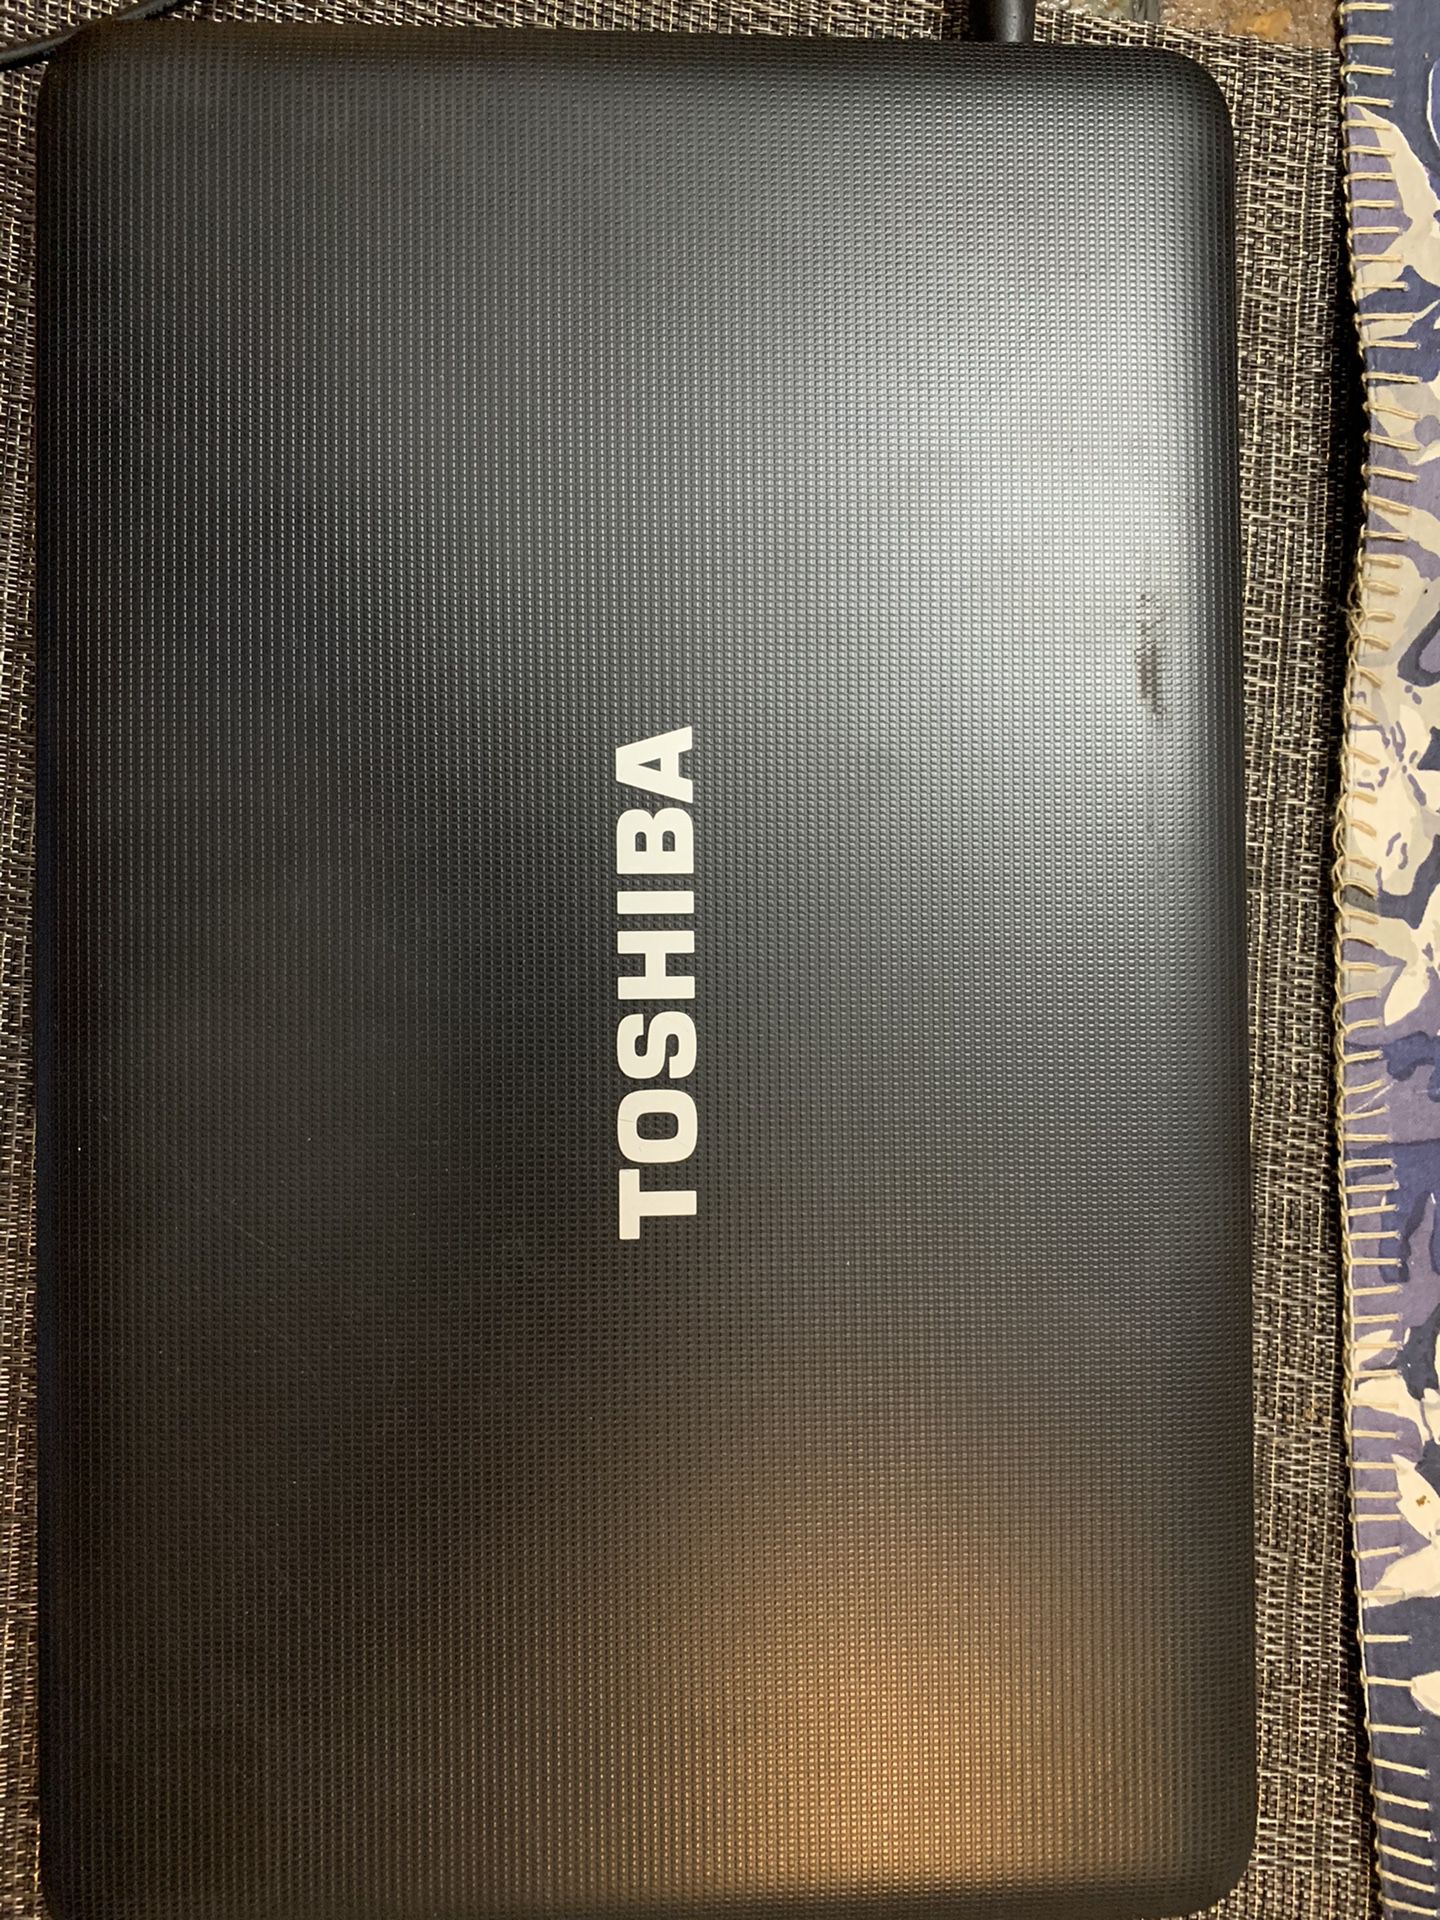 LAPTOP TOSHIBA 17” FOR SALE